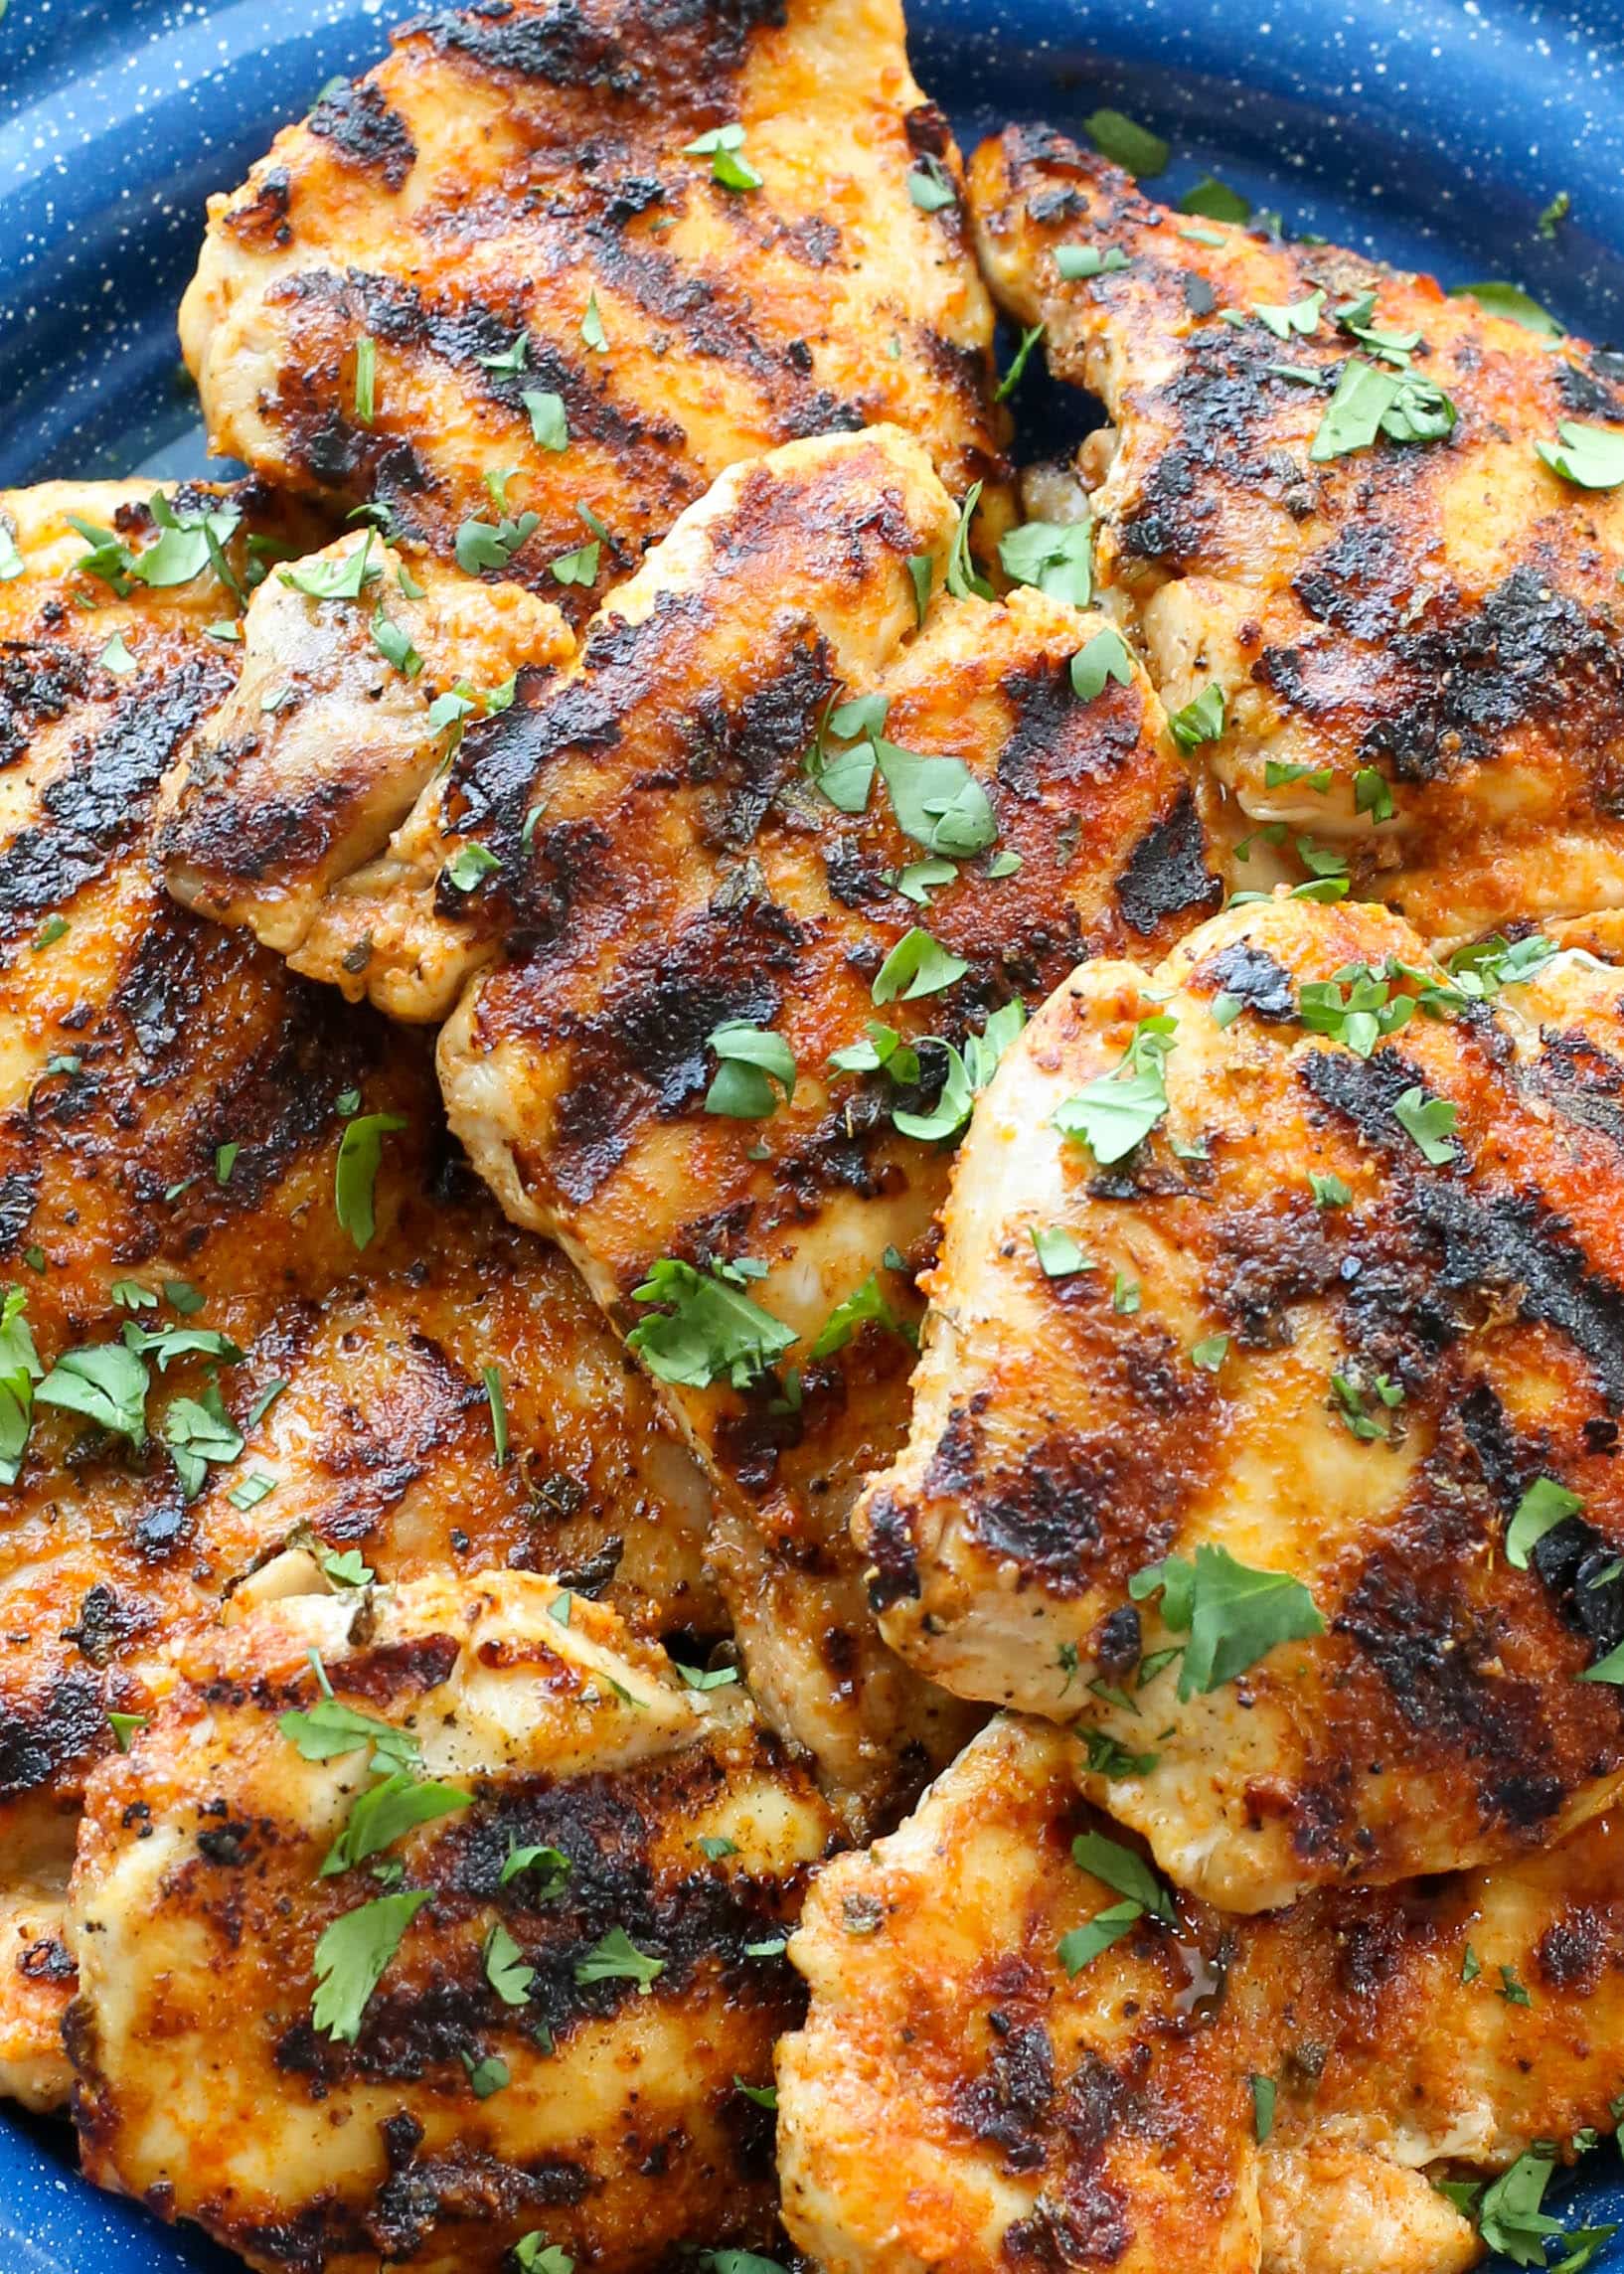 Juicy, flavorful chicken thighs, in just minutes!